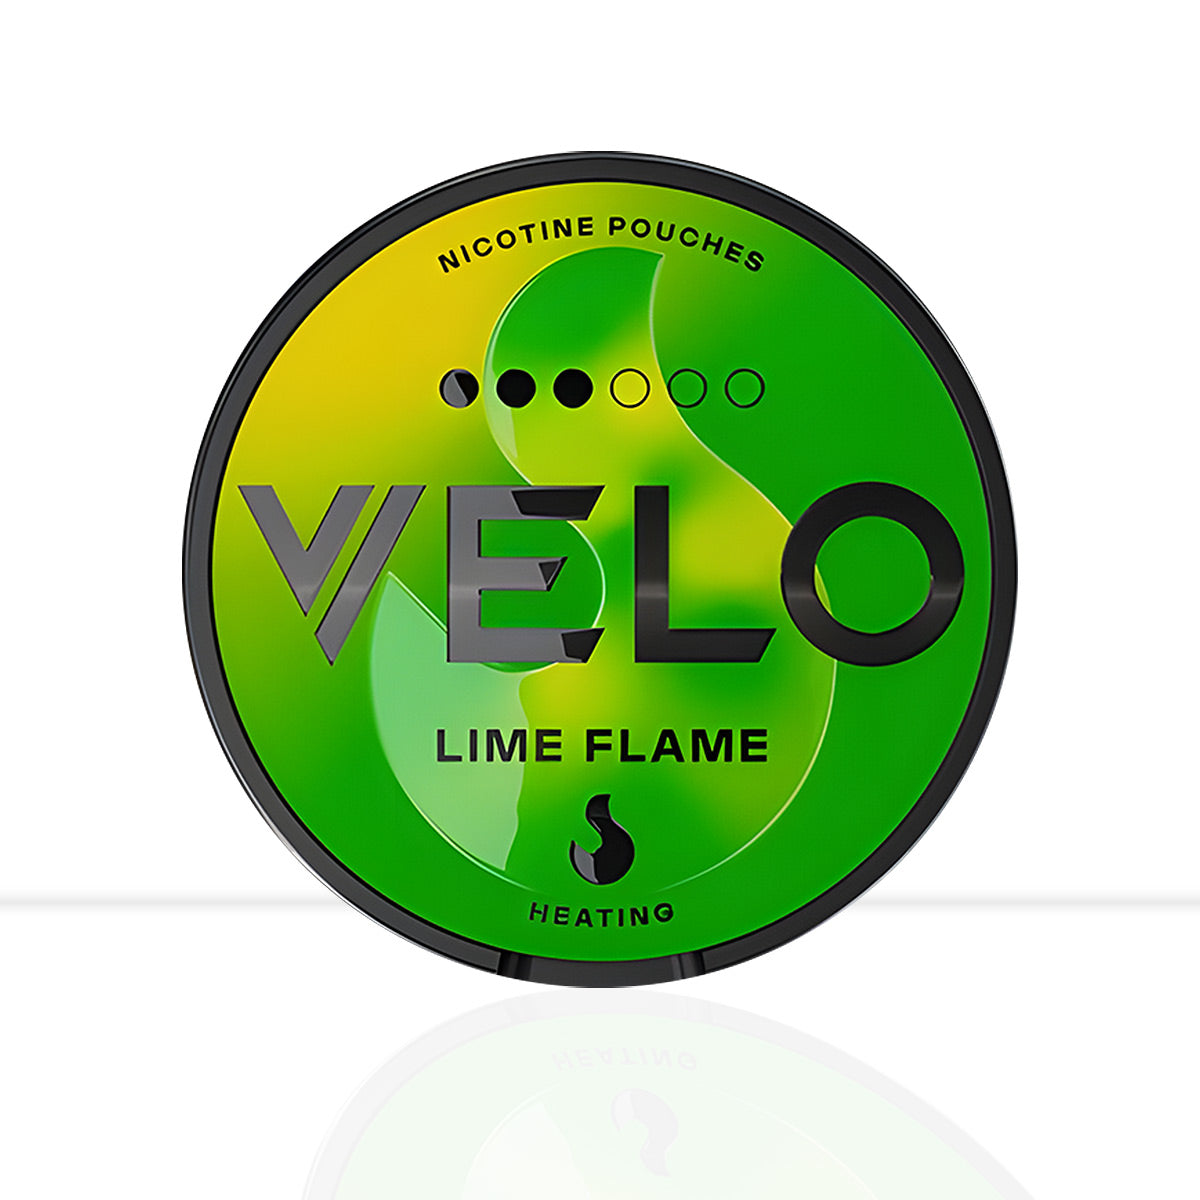 Velo Lime Flame Nicotine Pouch